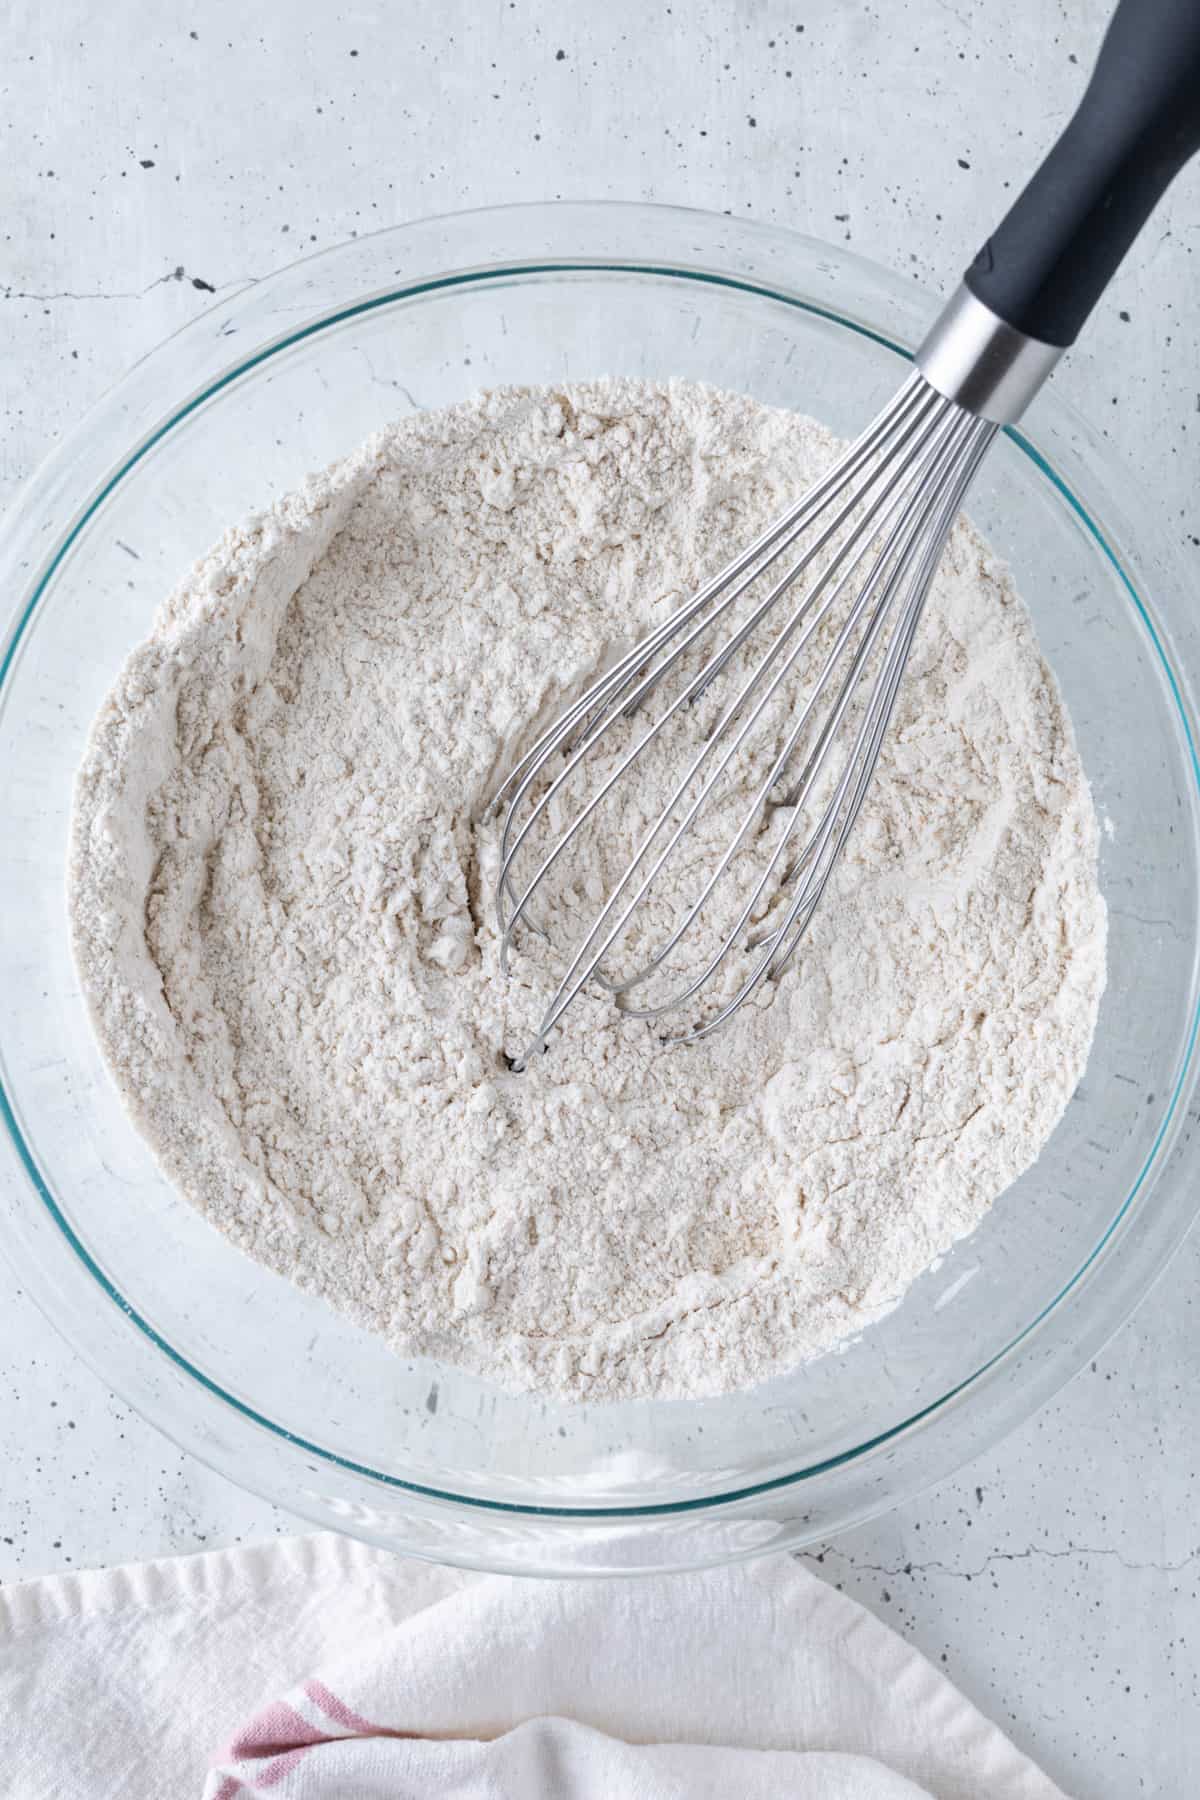 The dry ingredients in a large bowl with a large whisk.